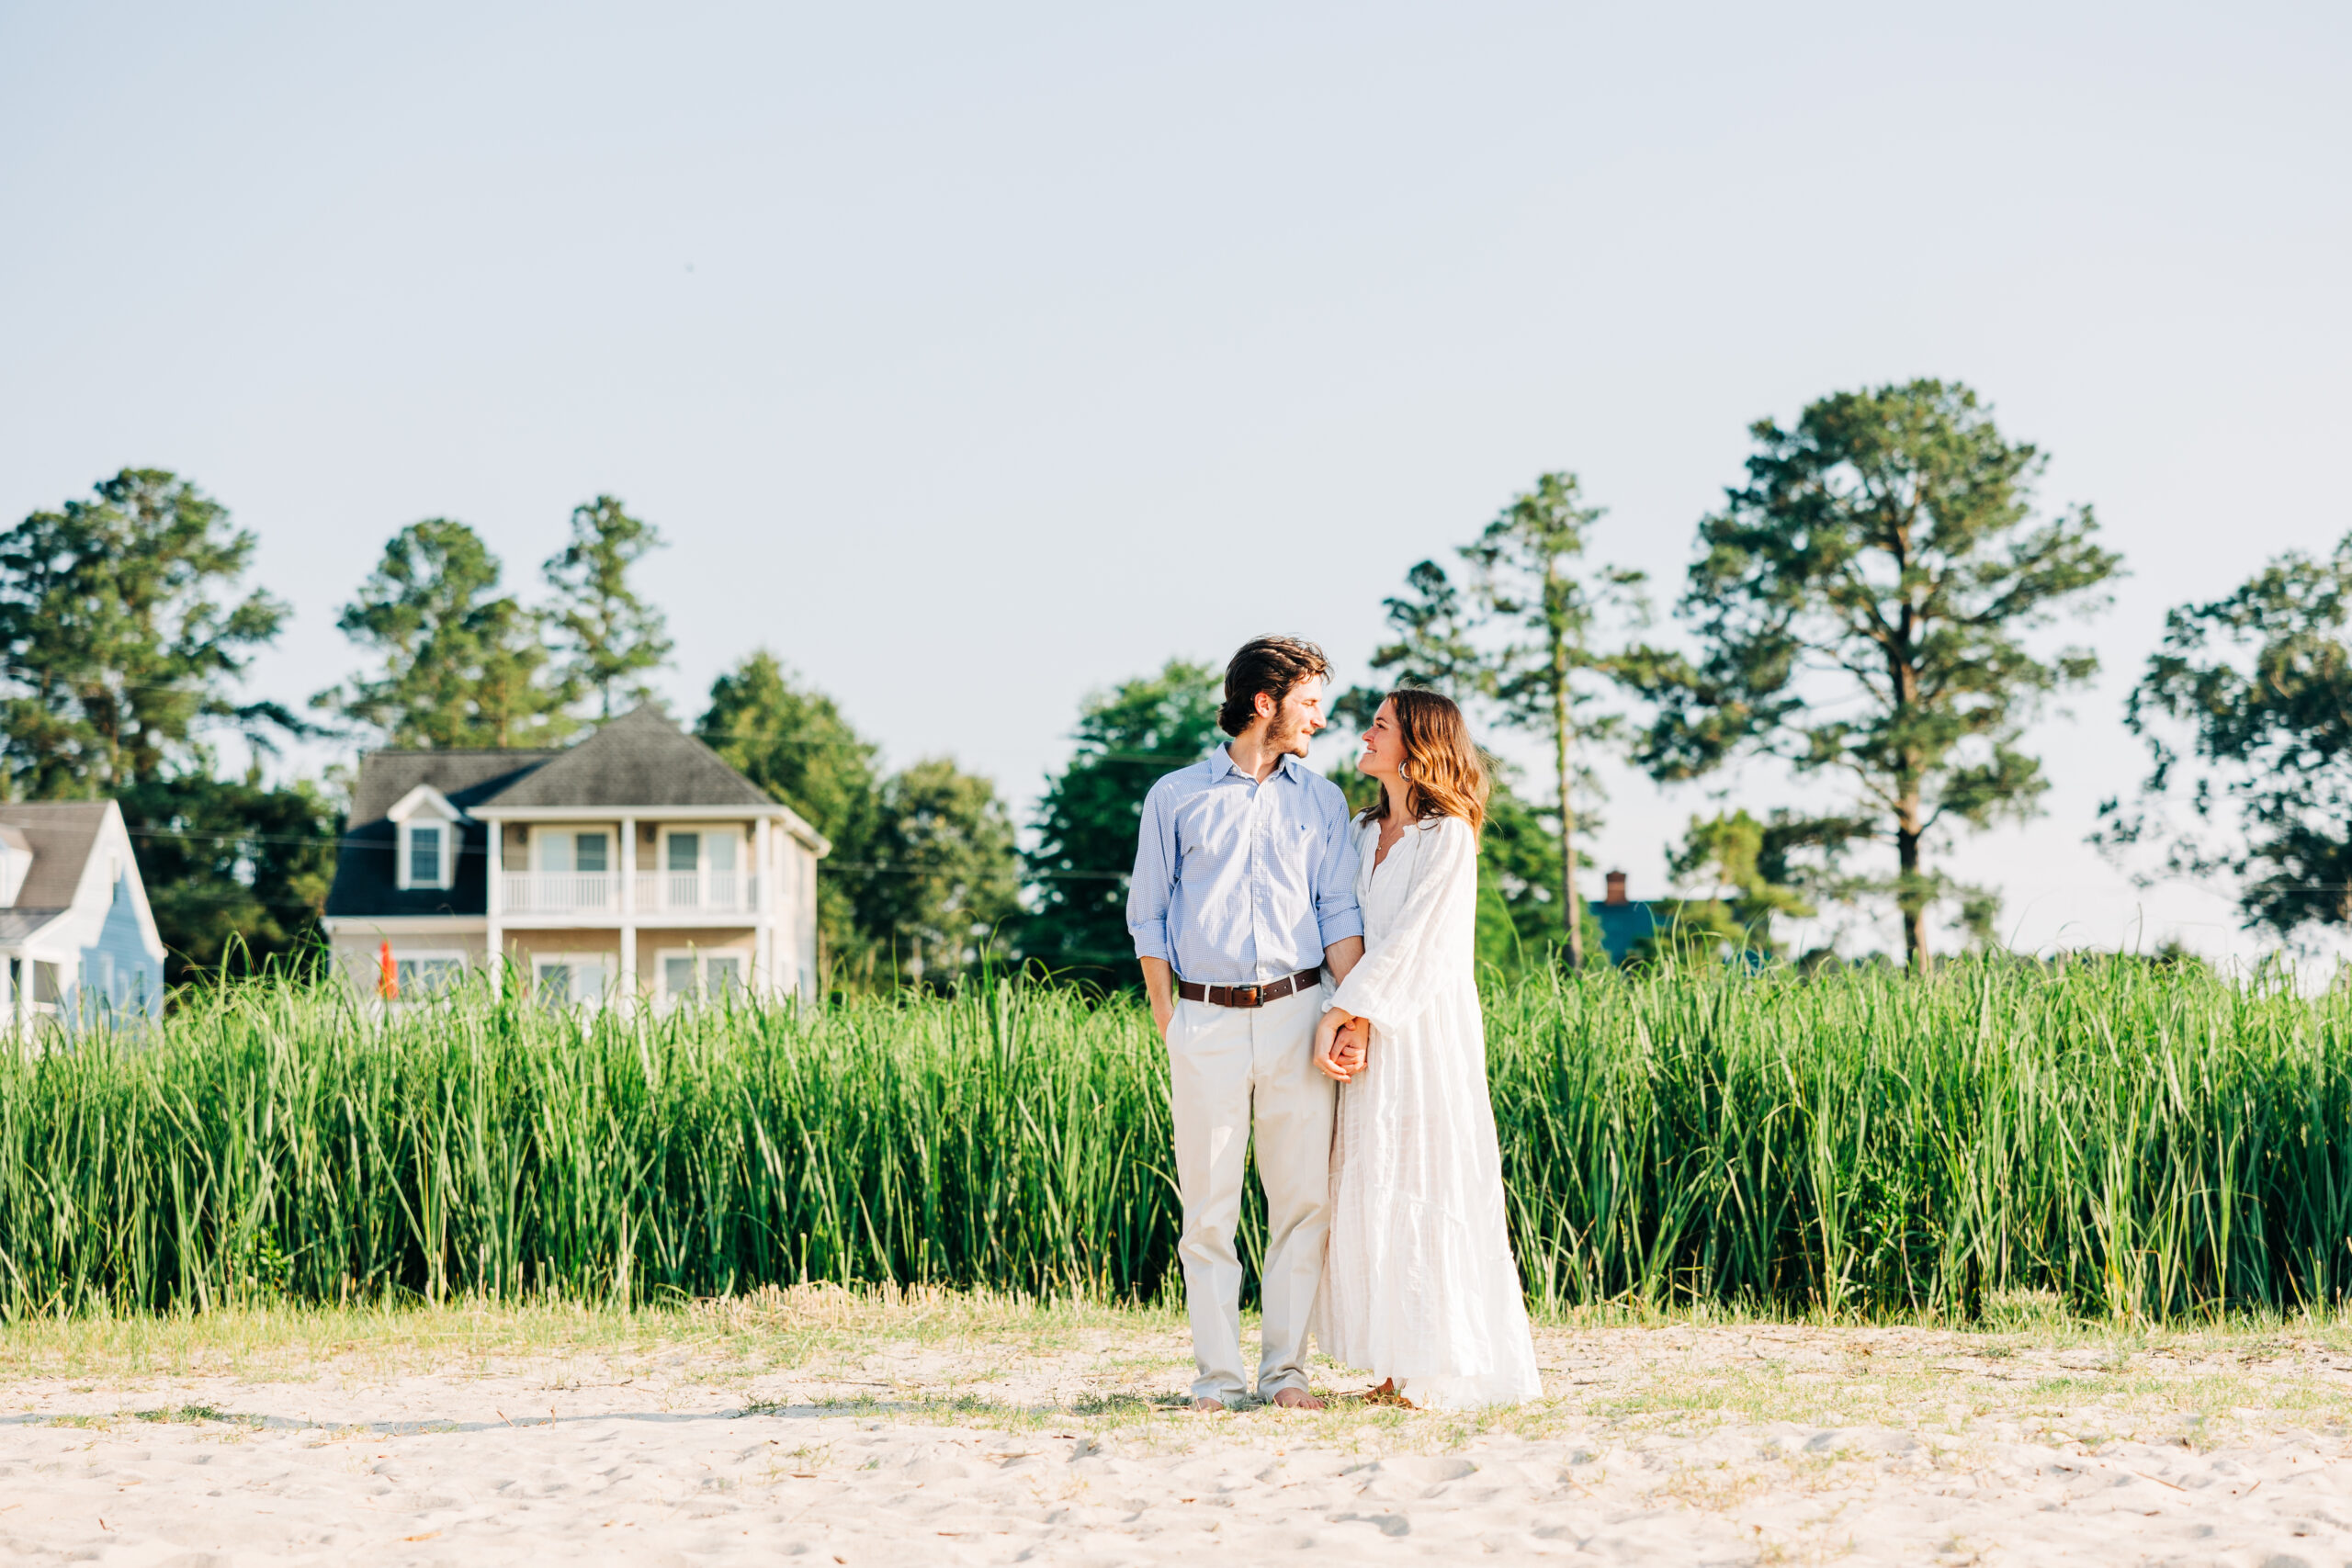 Beautiful and Timeless Love Story at Rappahannock River | Popped Blog